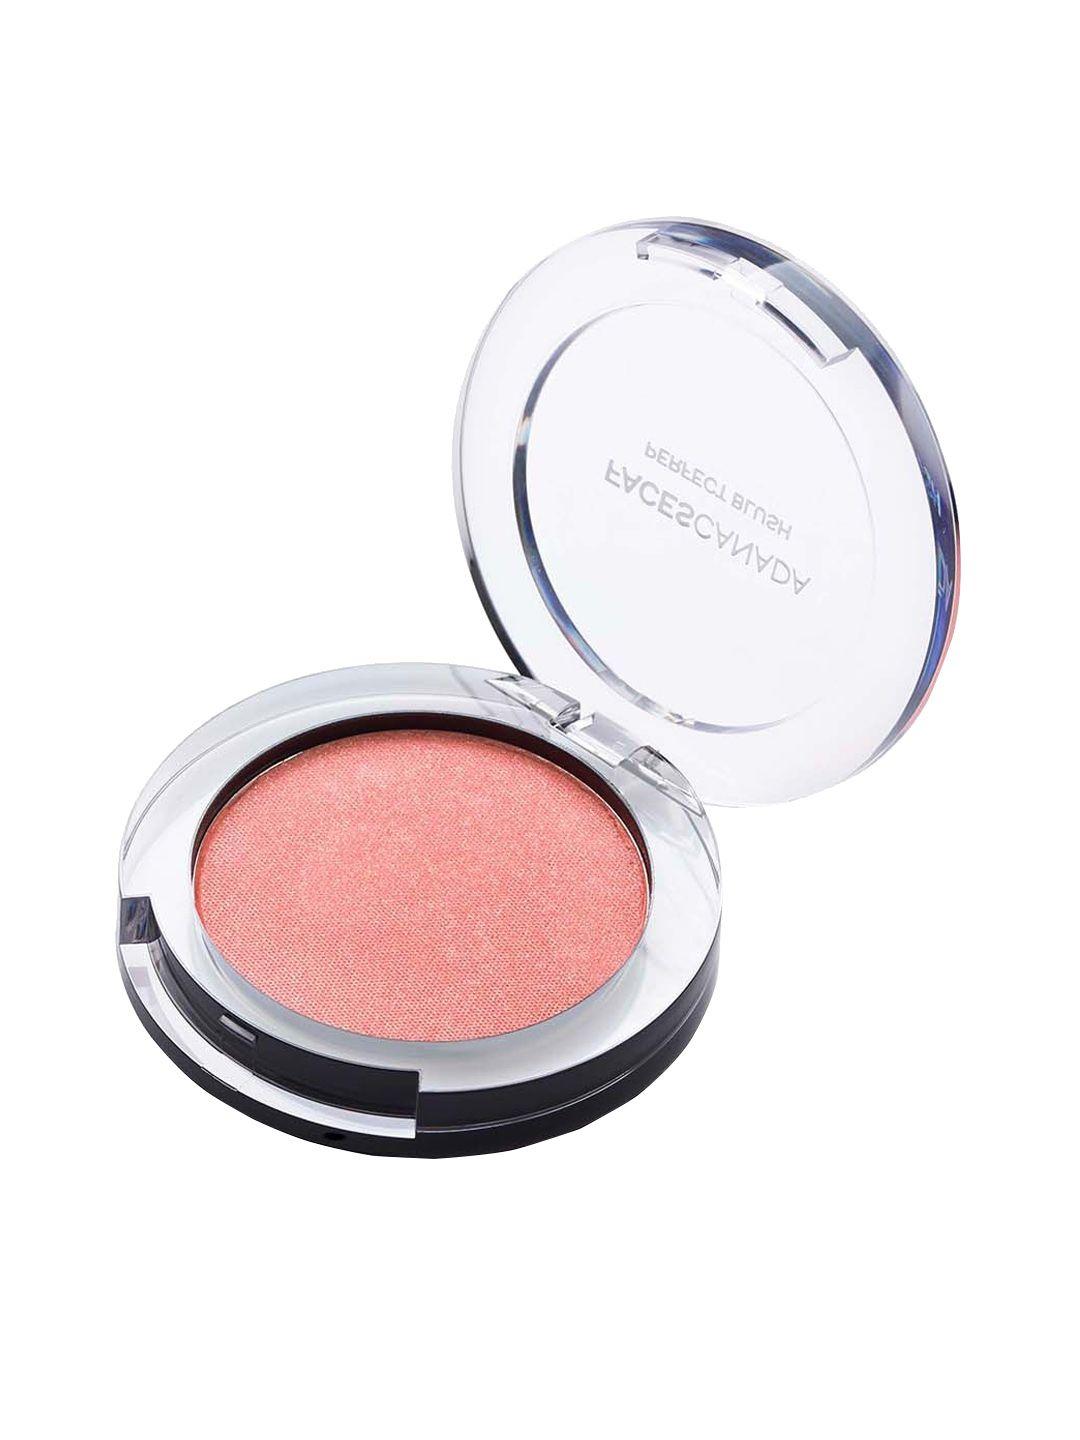 faces canada perfect blush - silky smooth texture - 5g - coral pink 01